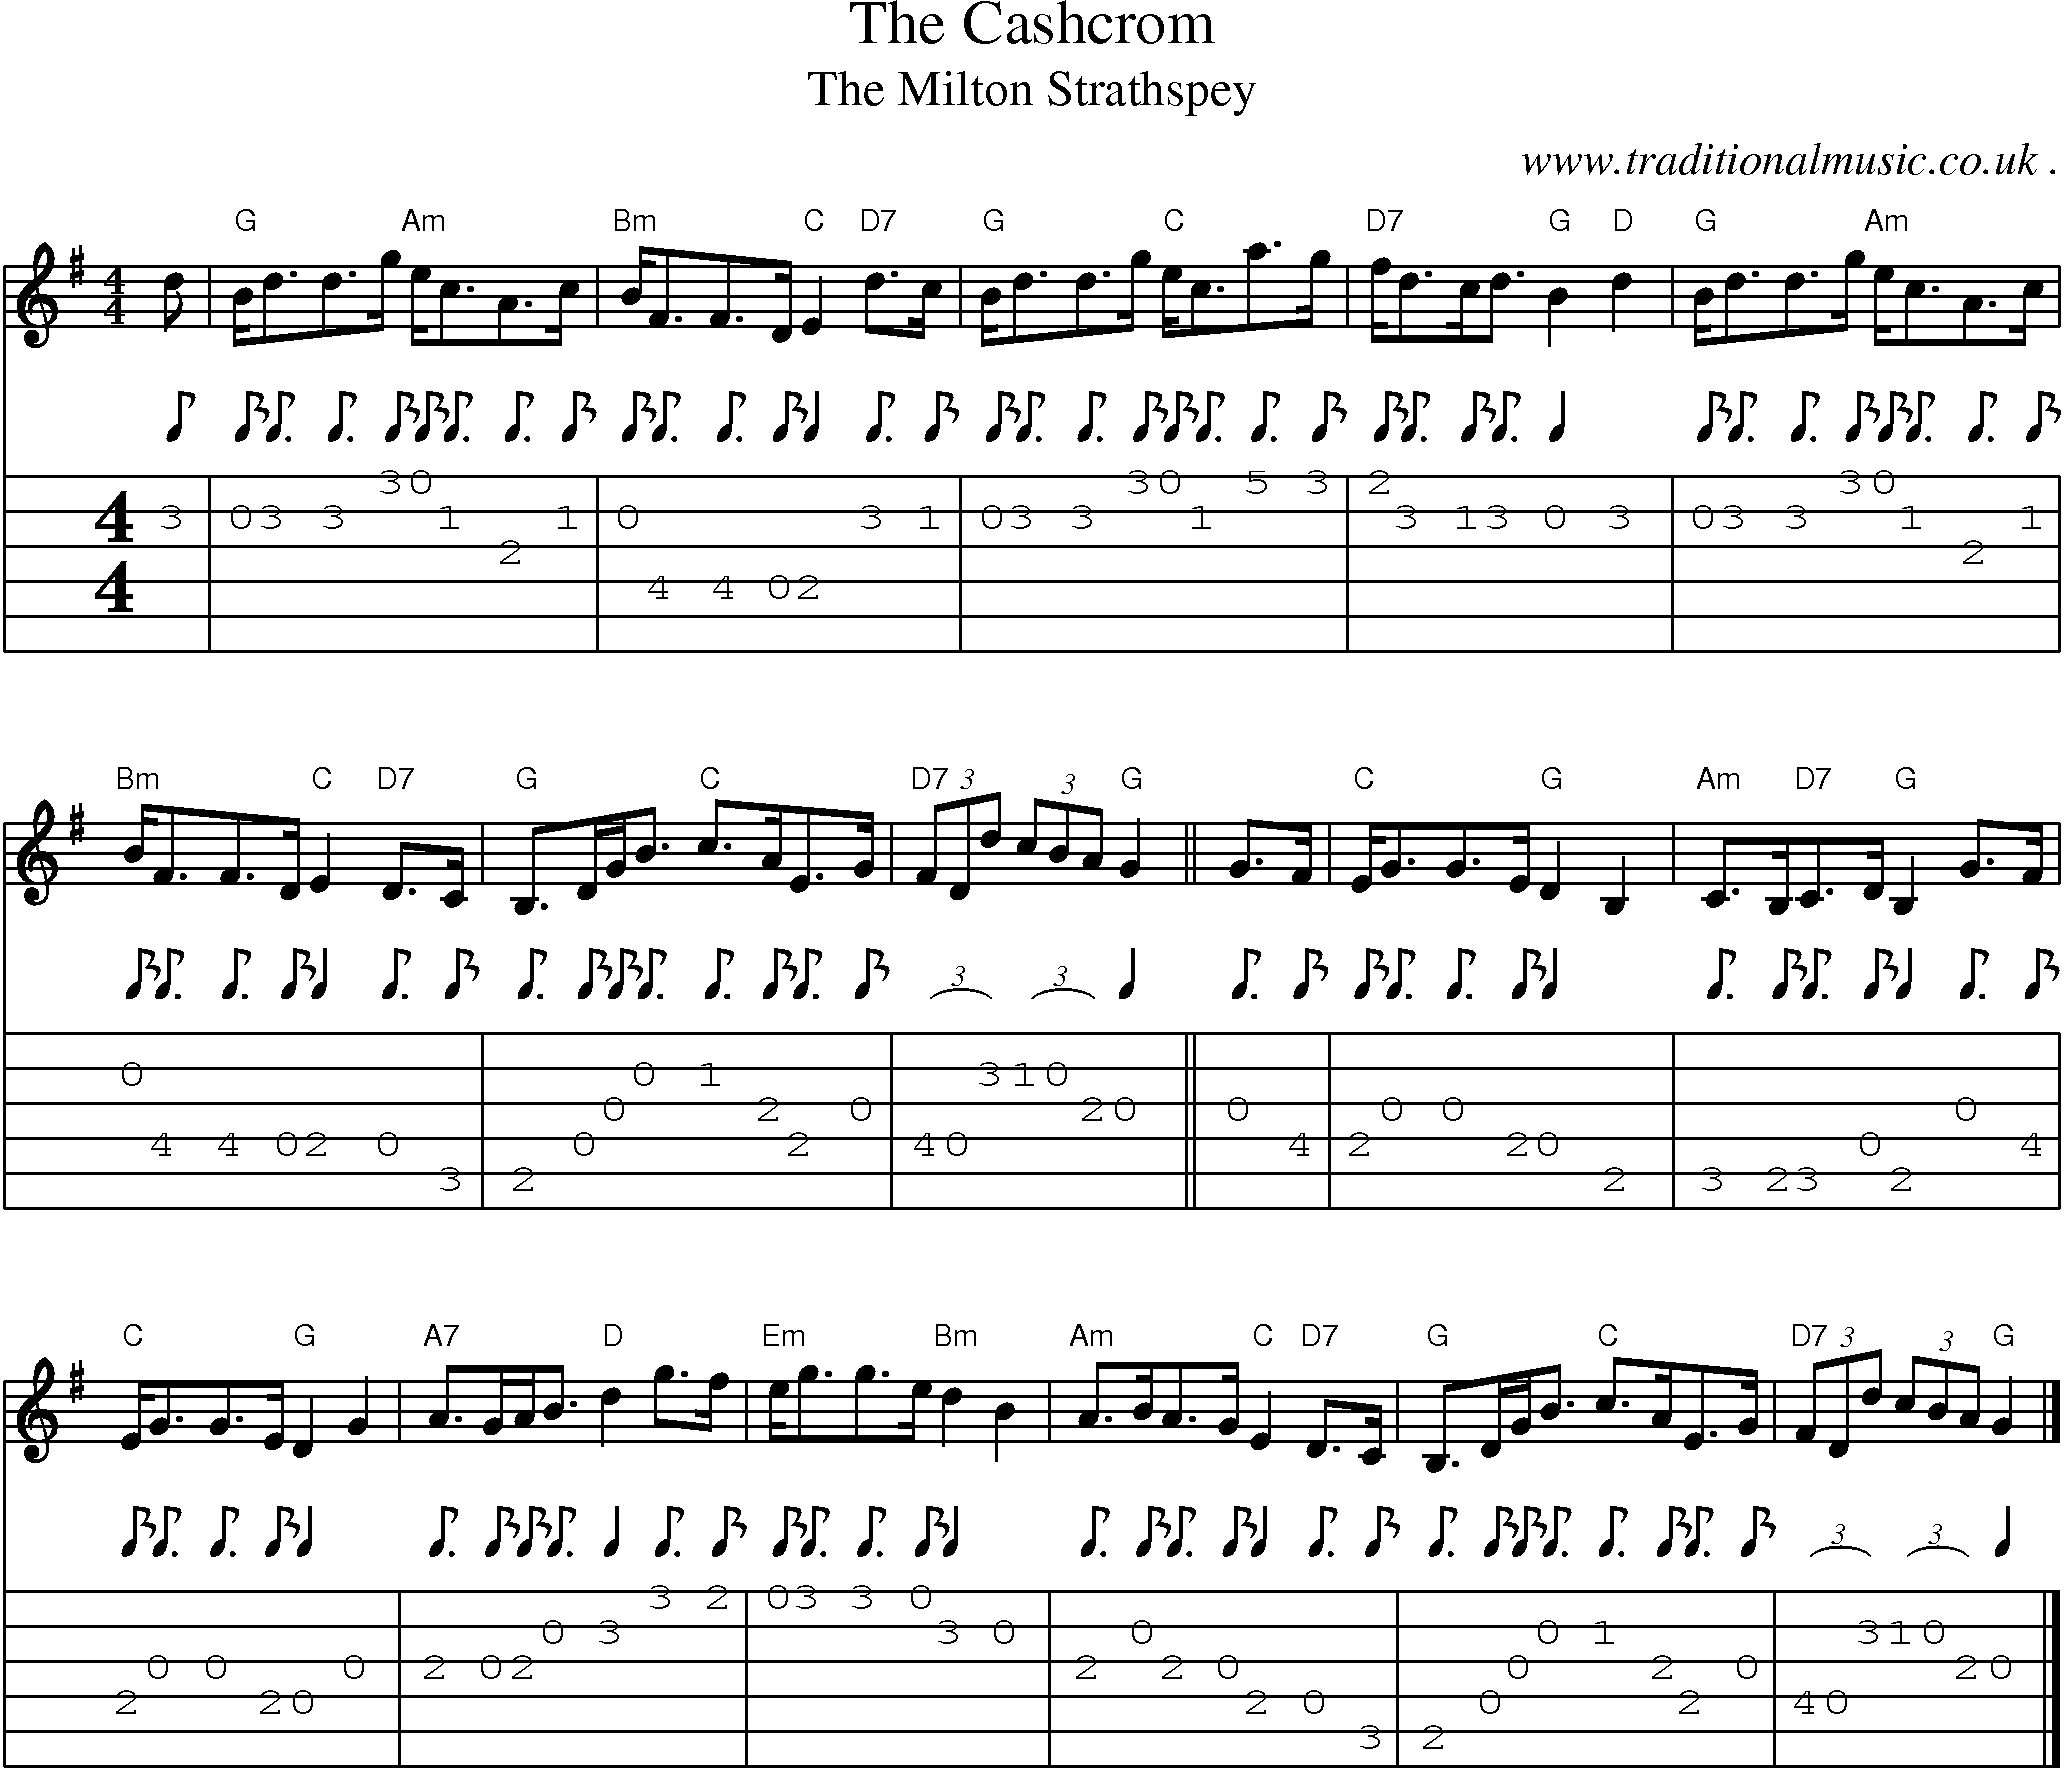 Sheet-music  score, Chords and Guitar Tabs for The Cashcrom